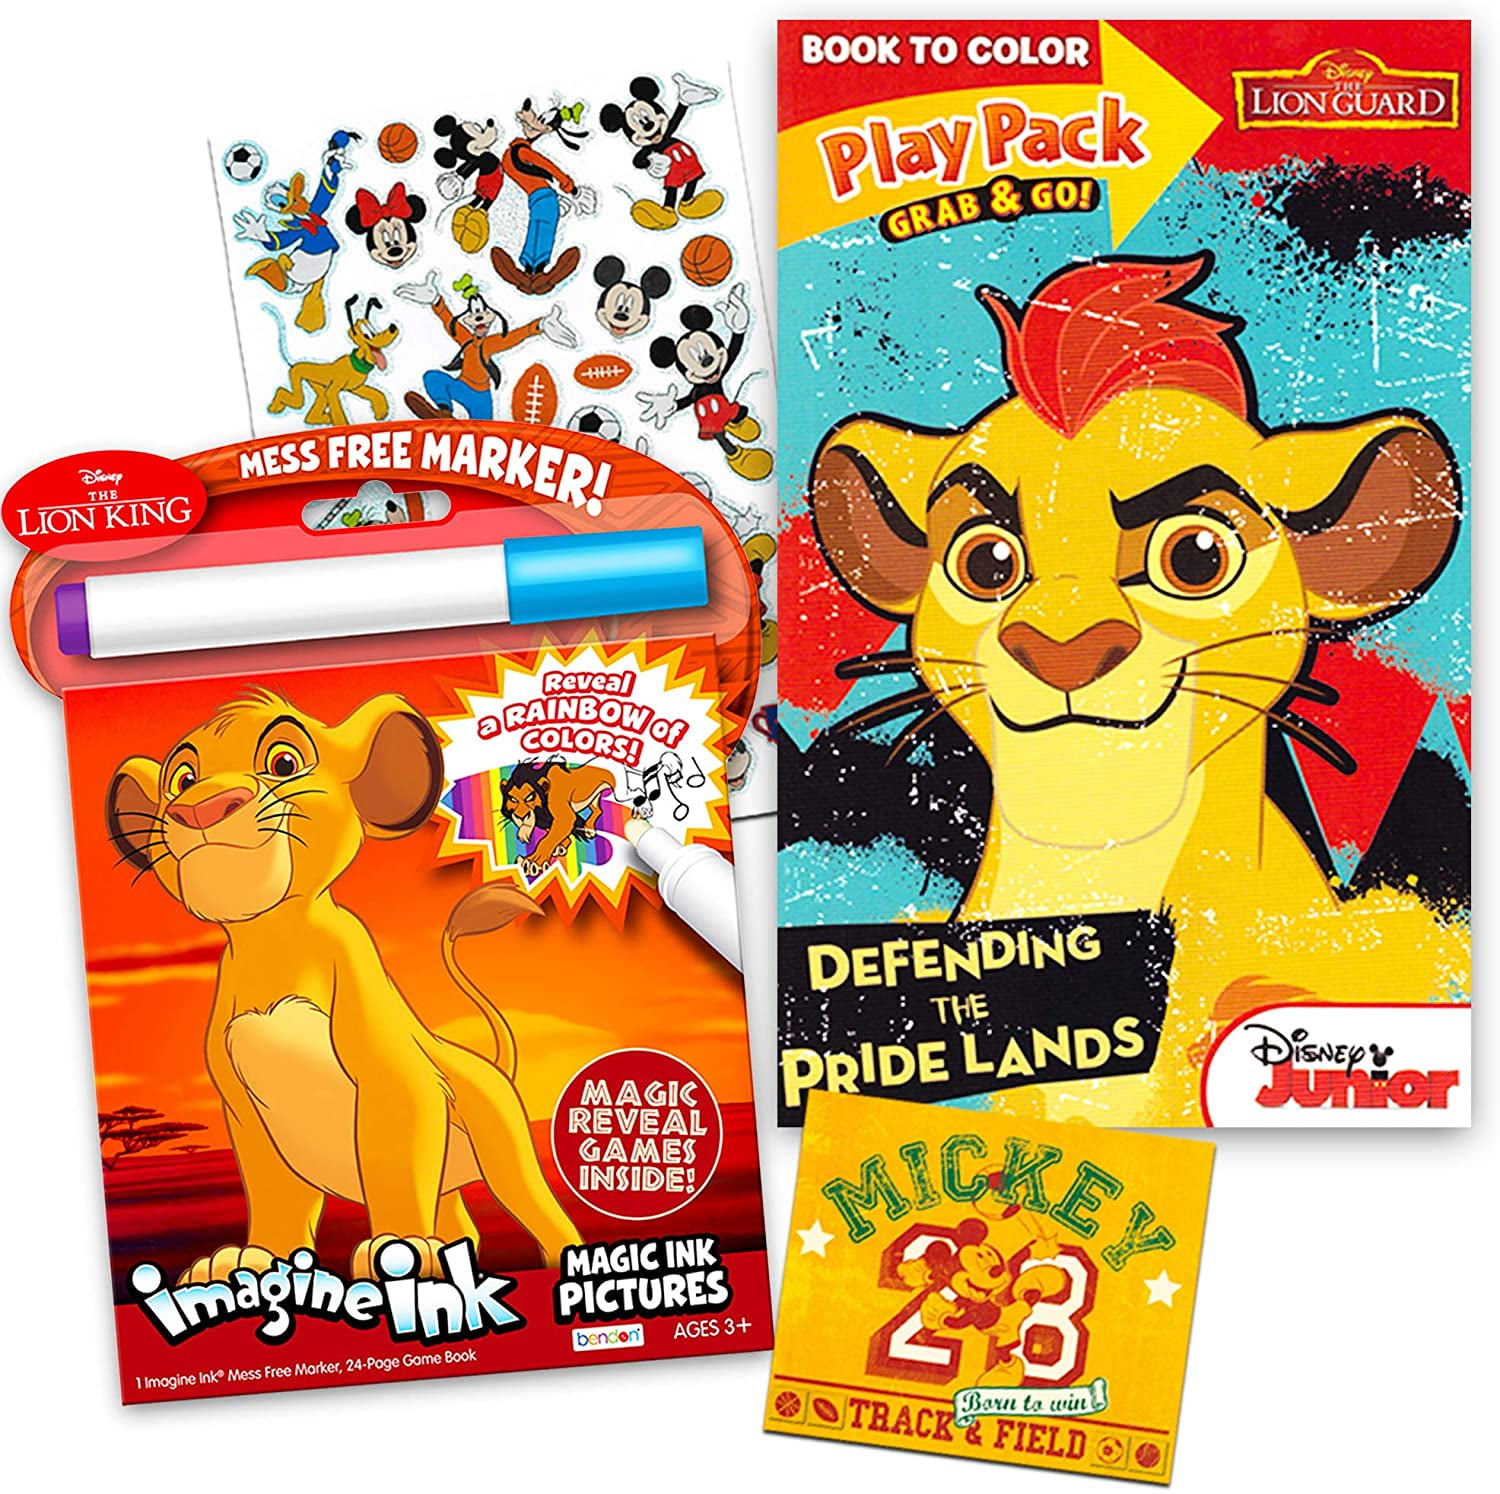 Download Disney Lion King And Lion Guard Coloring Book Set Mess Free Imagine Ink Book Play Pack And Bonus Stickers Lion King Party Supplies Walmart Com Walmart Com